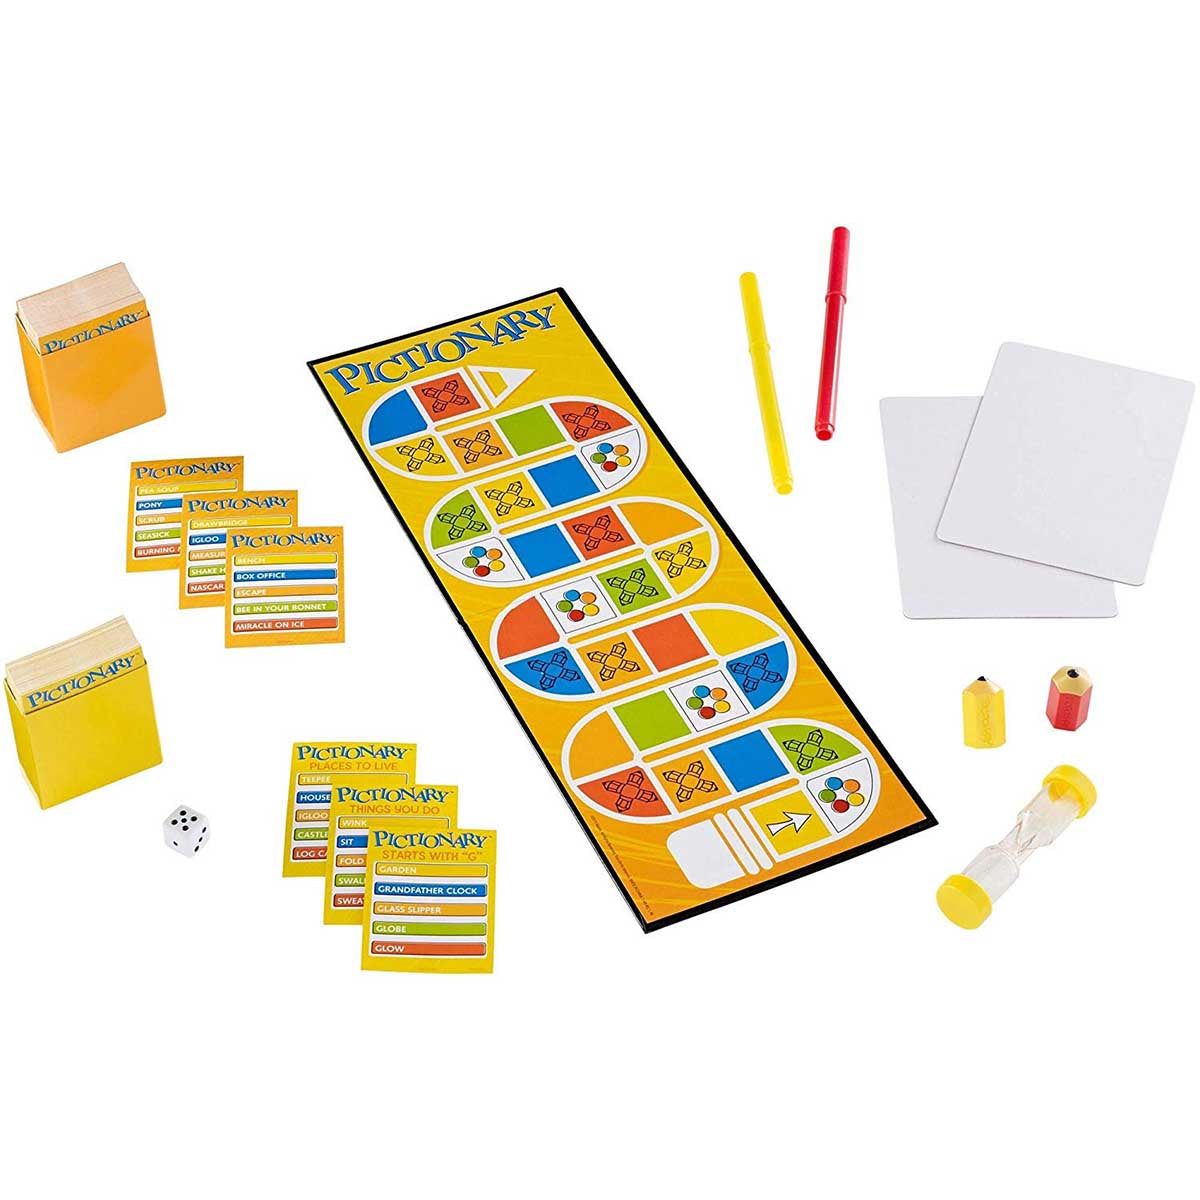 PICTIONARY GAME Pieces, Dice Categories Cards and Timer - No board or box